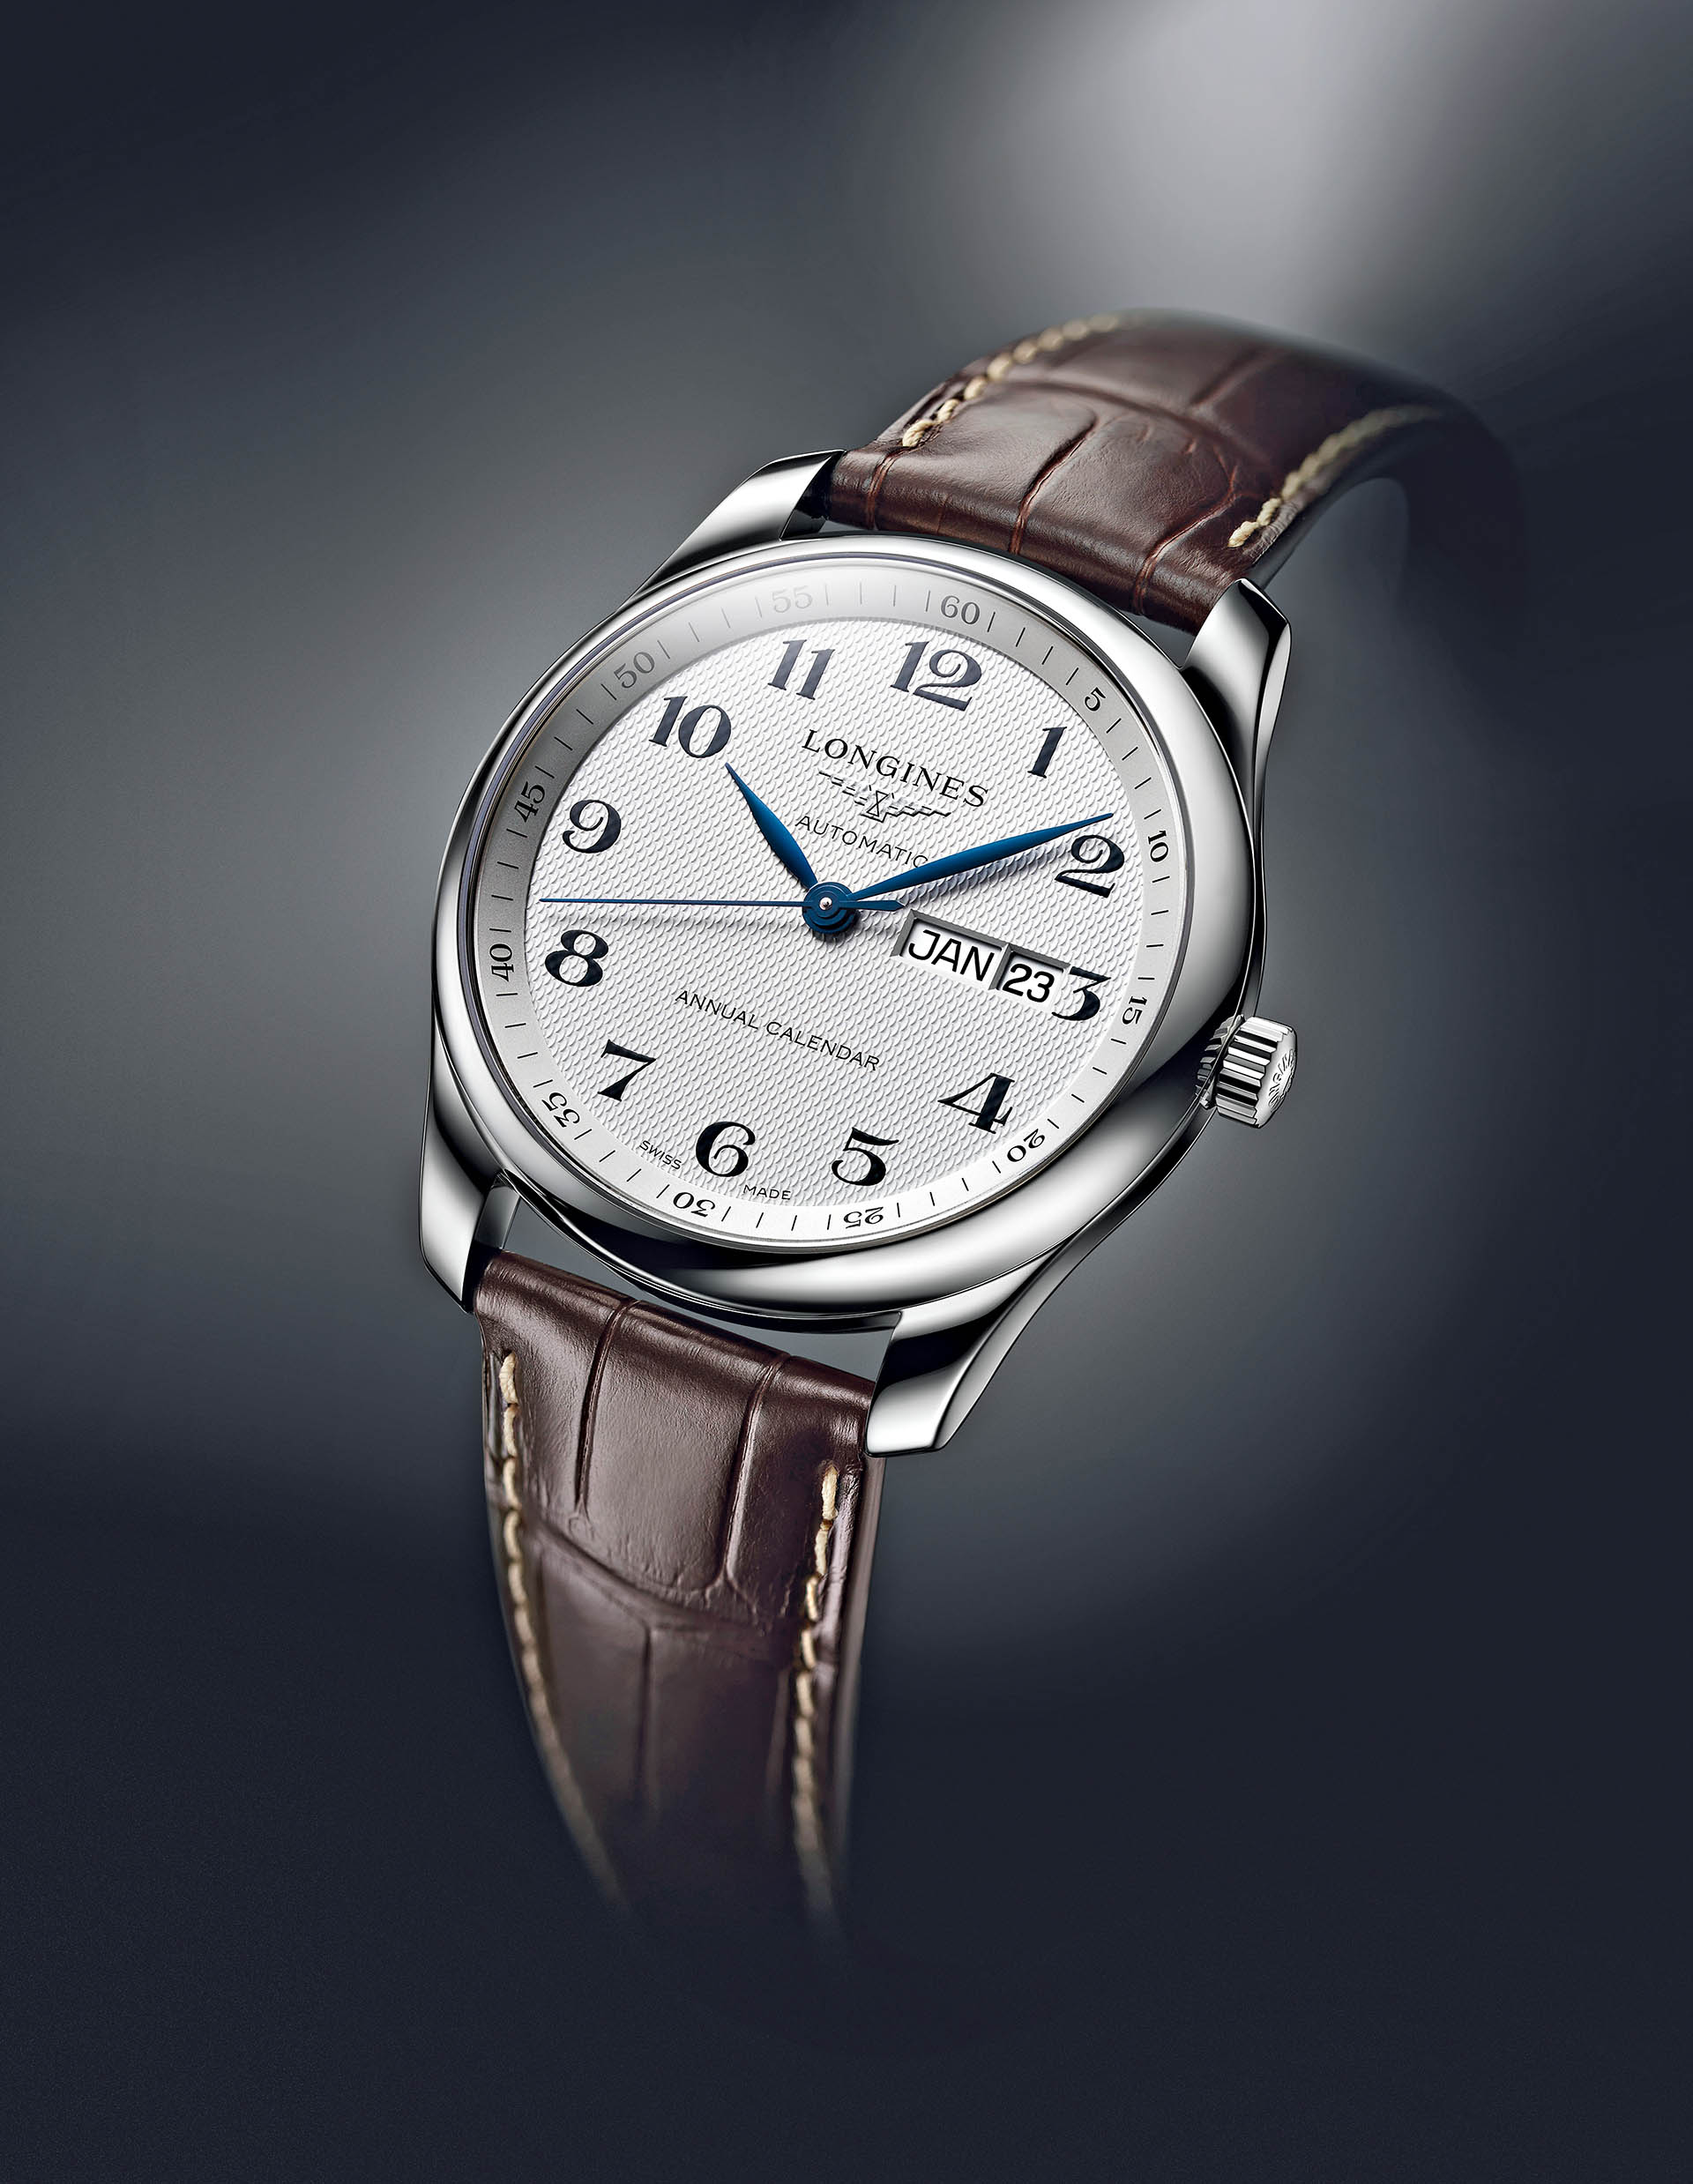 The Longines Master Collection - Annual Calendar